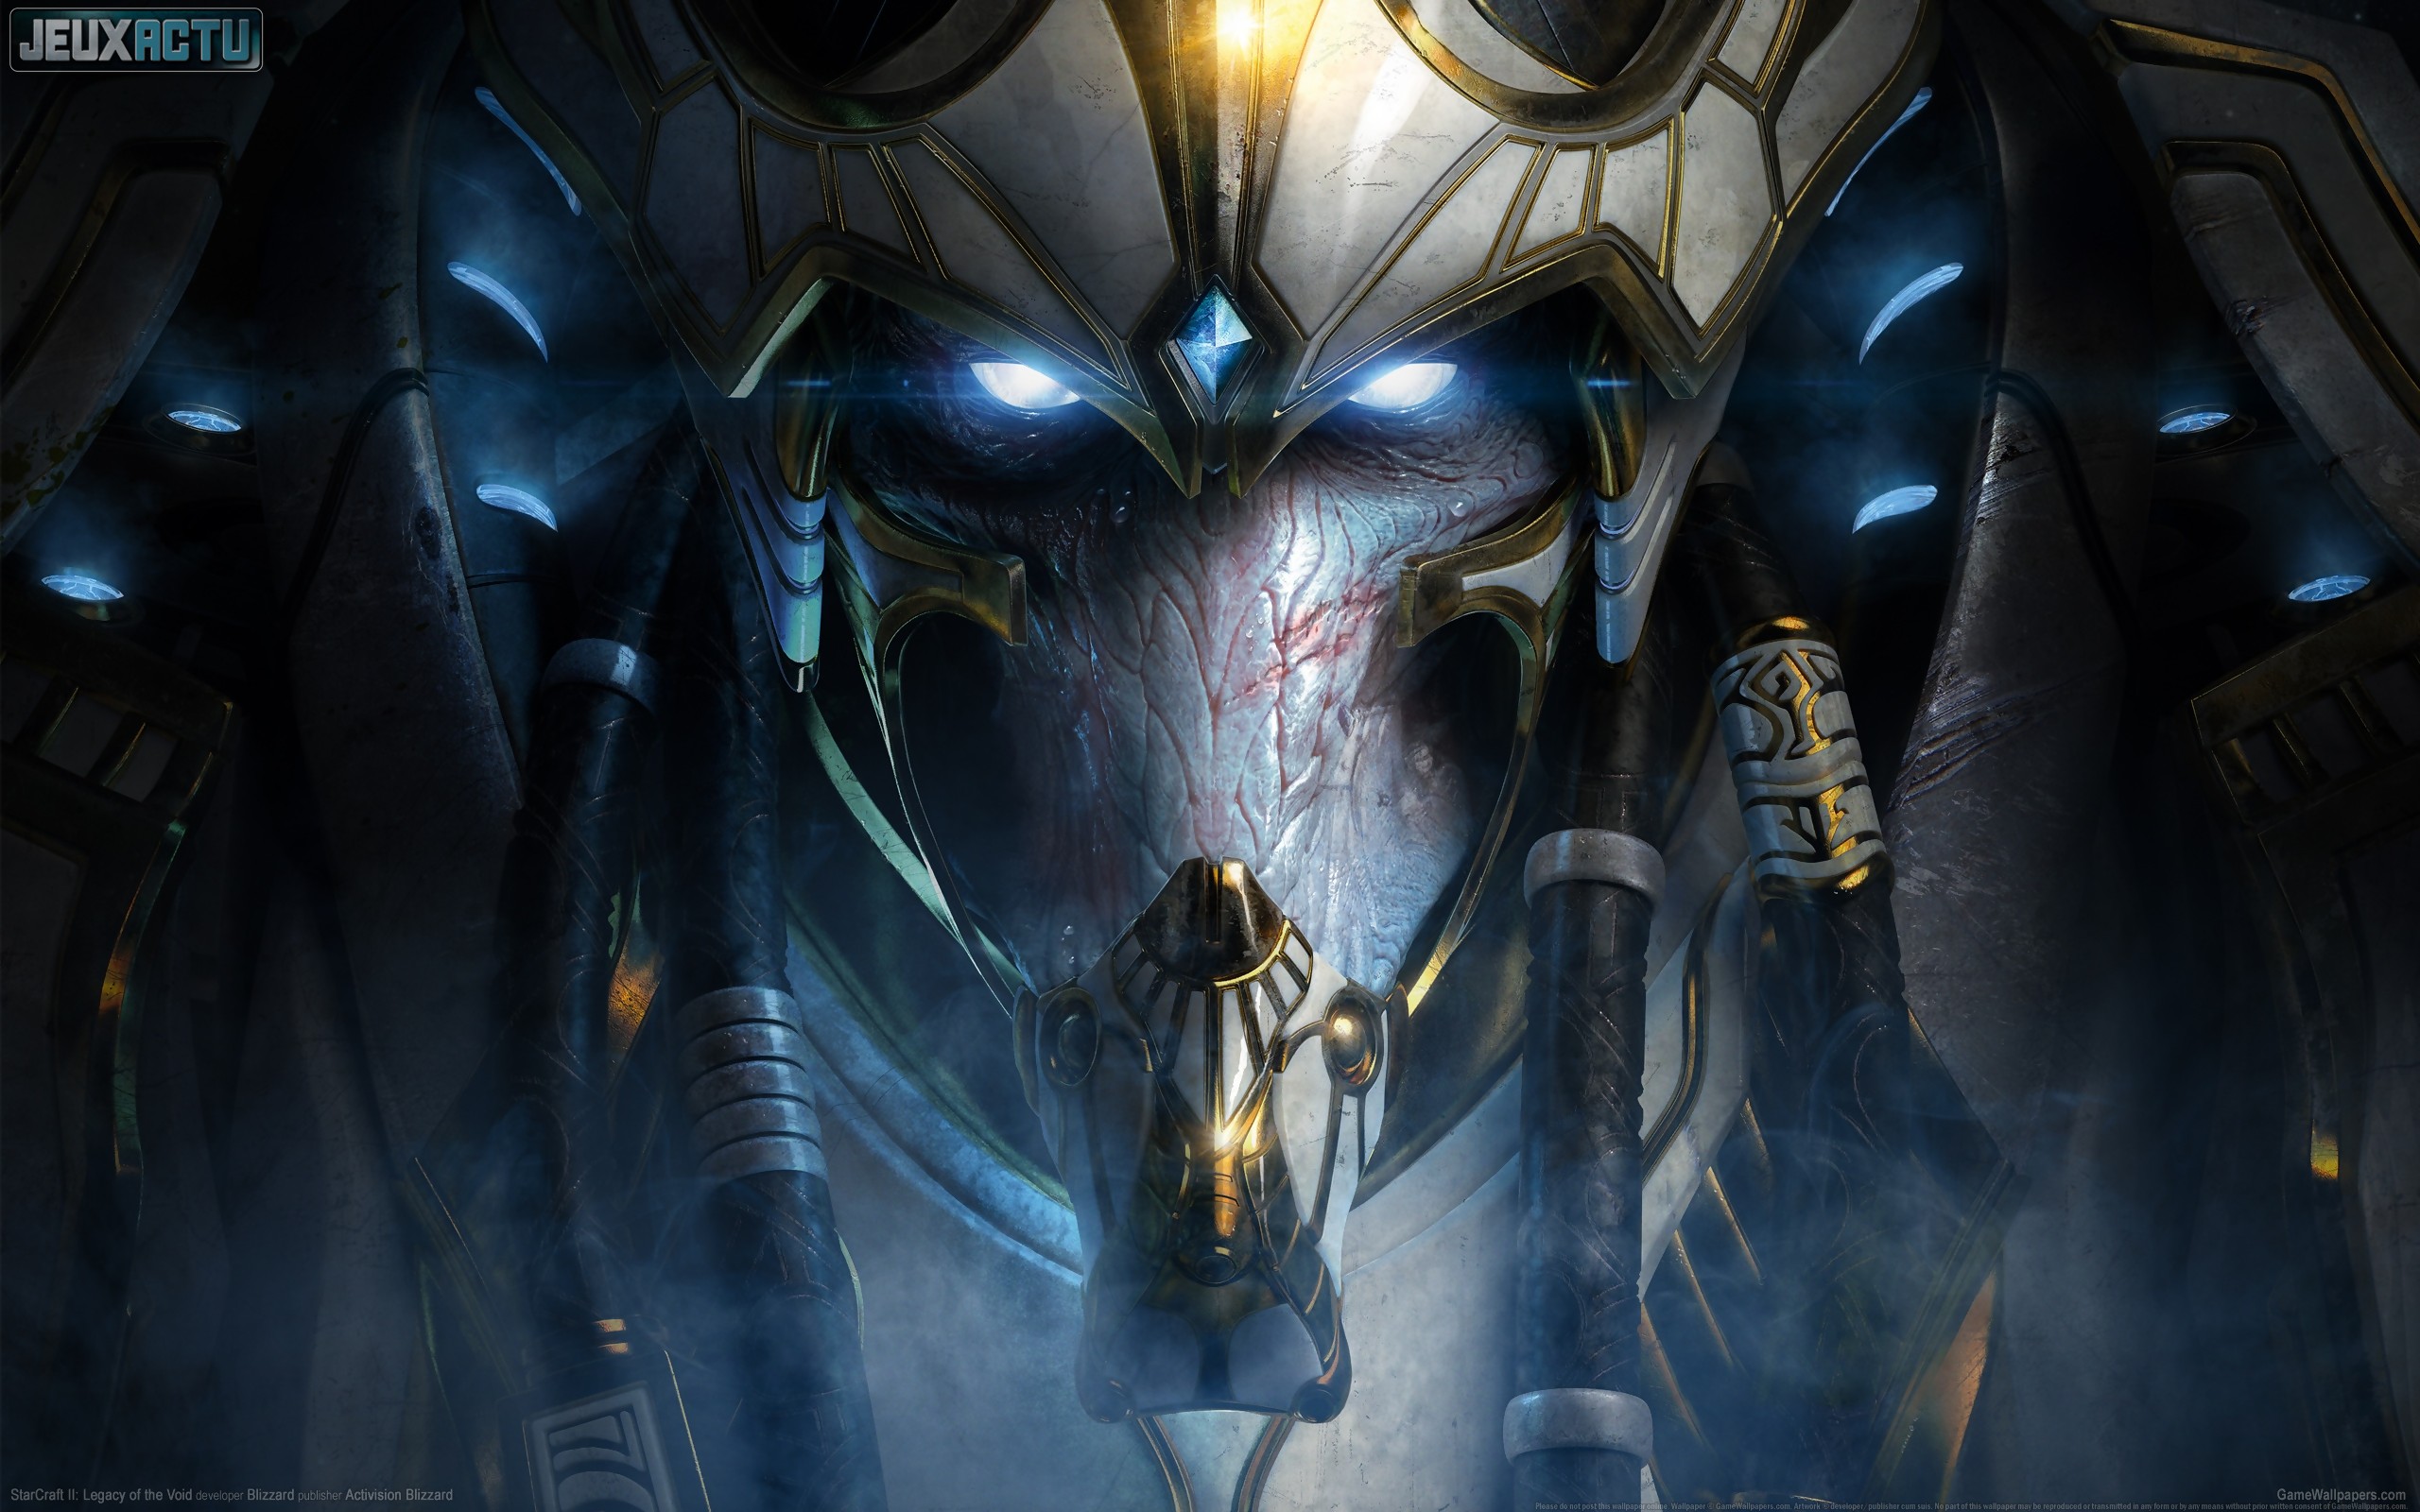 Poster of the void. STARCRAFT 2 Legacy of the Void. Старкрафт Legacy of the Void. Артанис старкрафт 2. STARCRAFT 2 протосы.